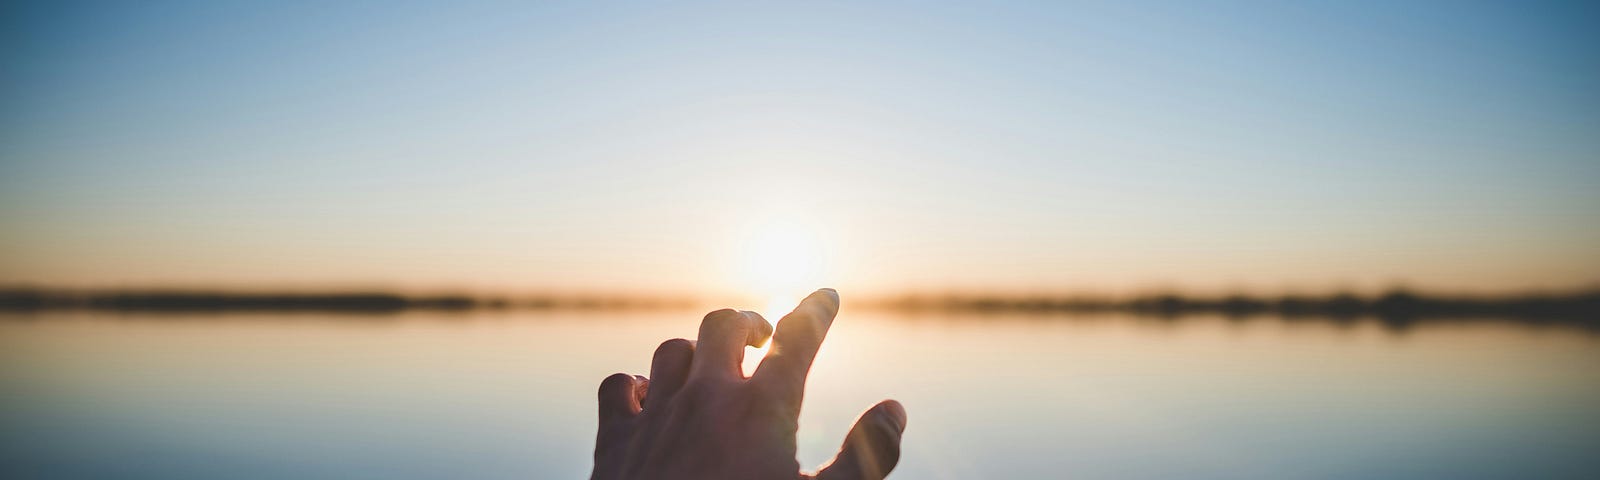 Photo of person’s had reaching out as if to touch the rising or setting sun.